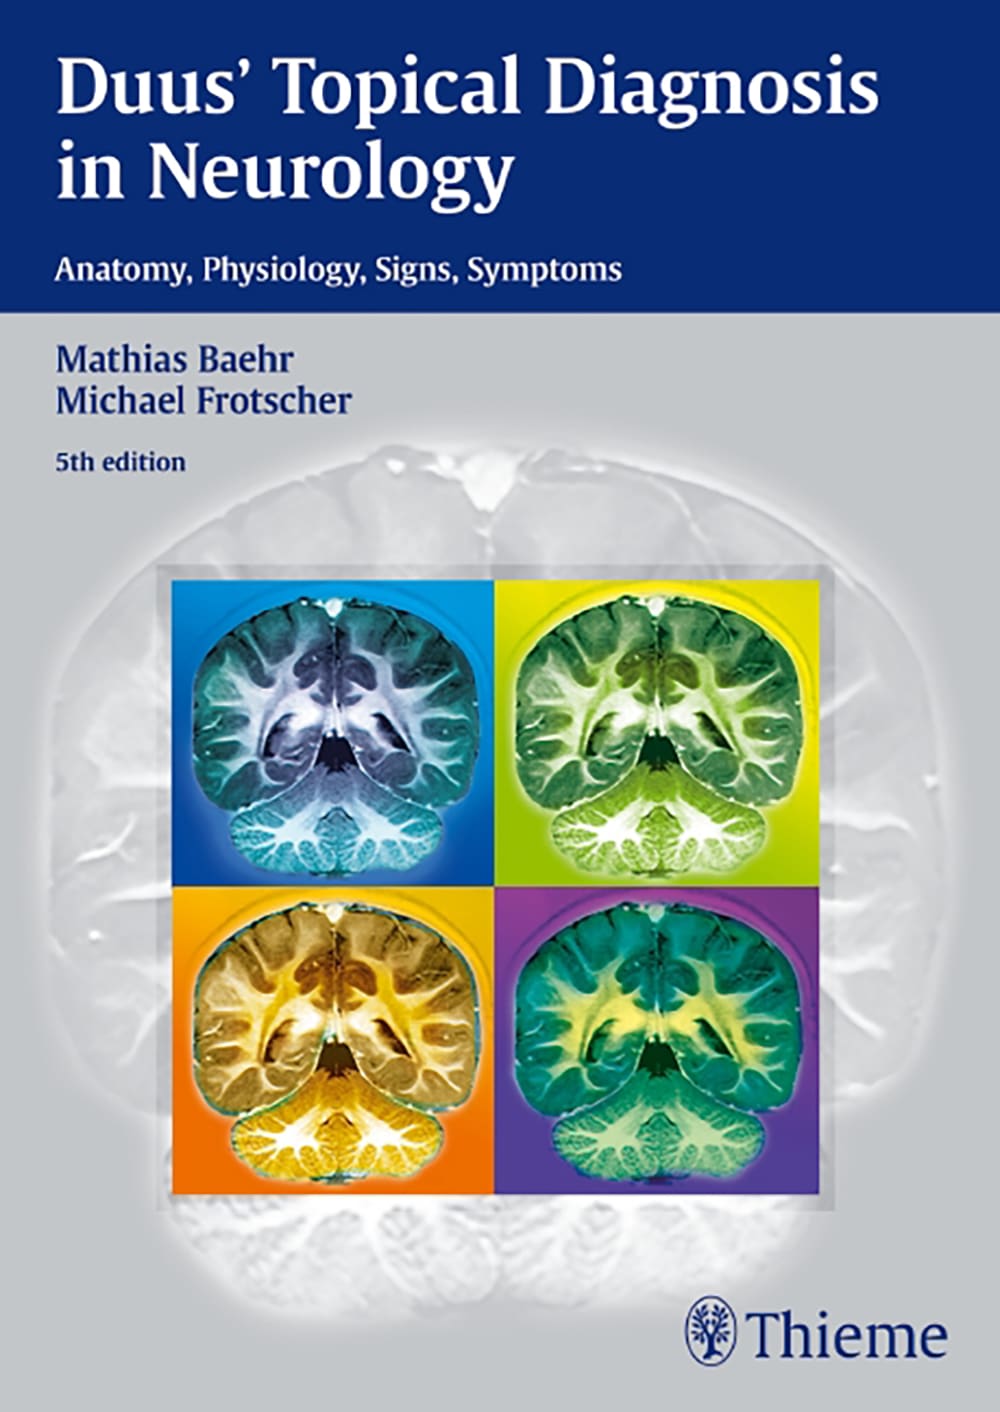 duus topical diagnosis in neurology anatomy - physiology - signs - symptoms 5th edition mathias baehr,